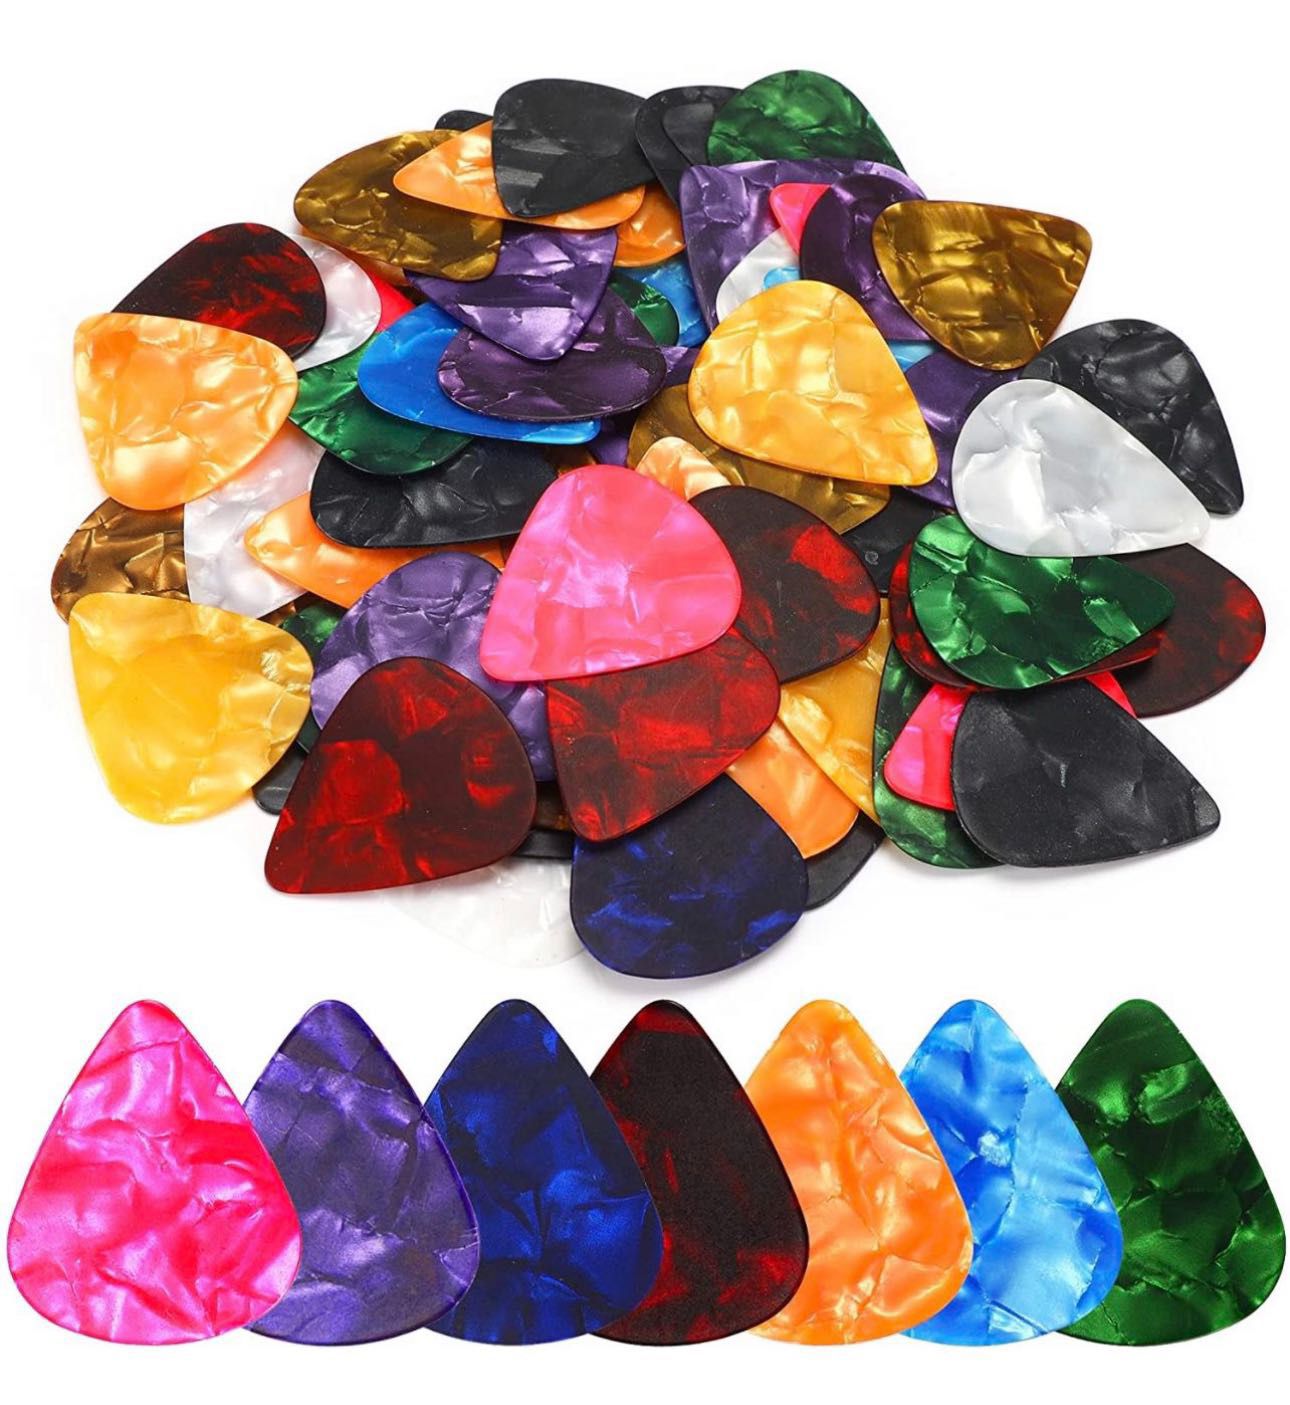 150 Pcs Guitar Picks Sampler Value Pack Mixed Colorful 0.96mm Thickness